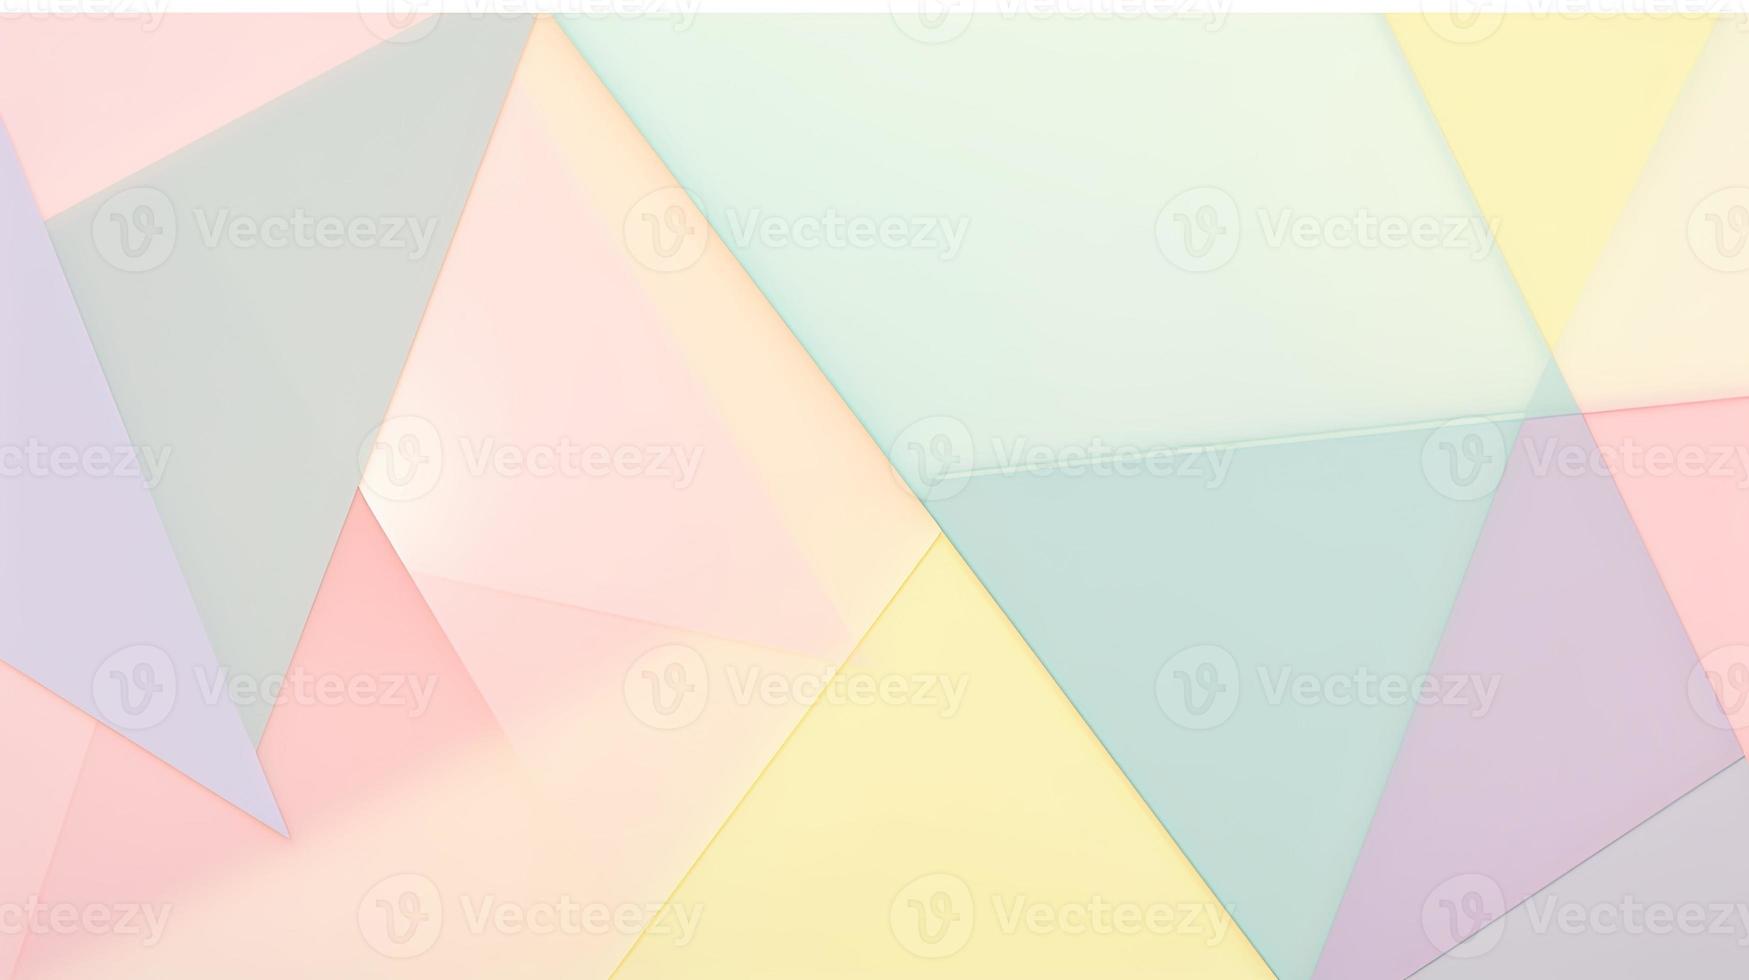 abstract paper background in pastel colors, geometric paper design, vector illustration photo